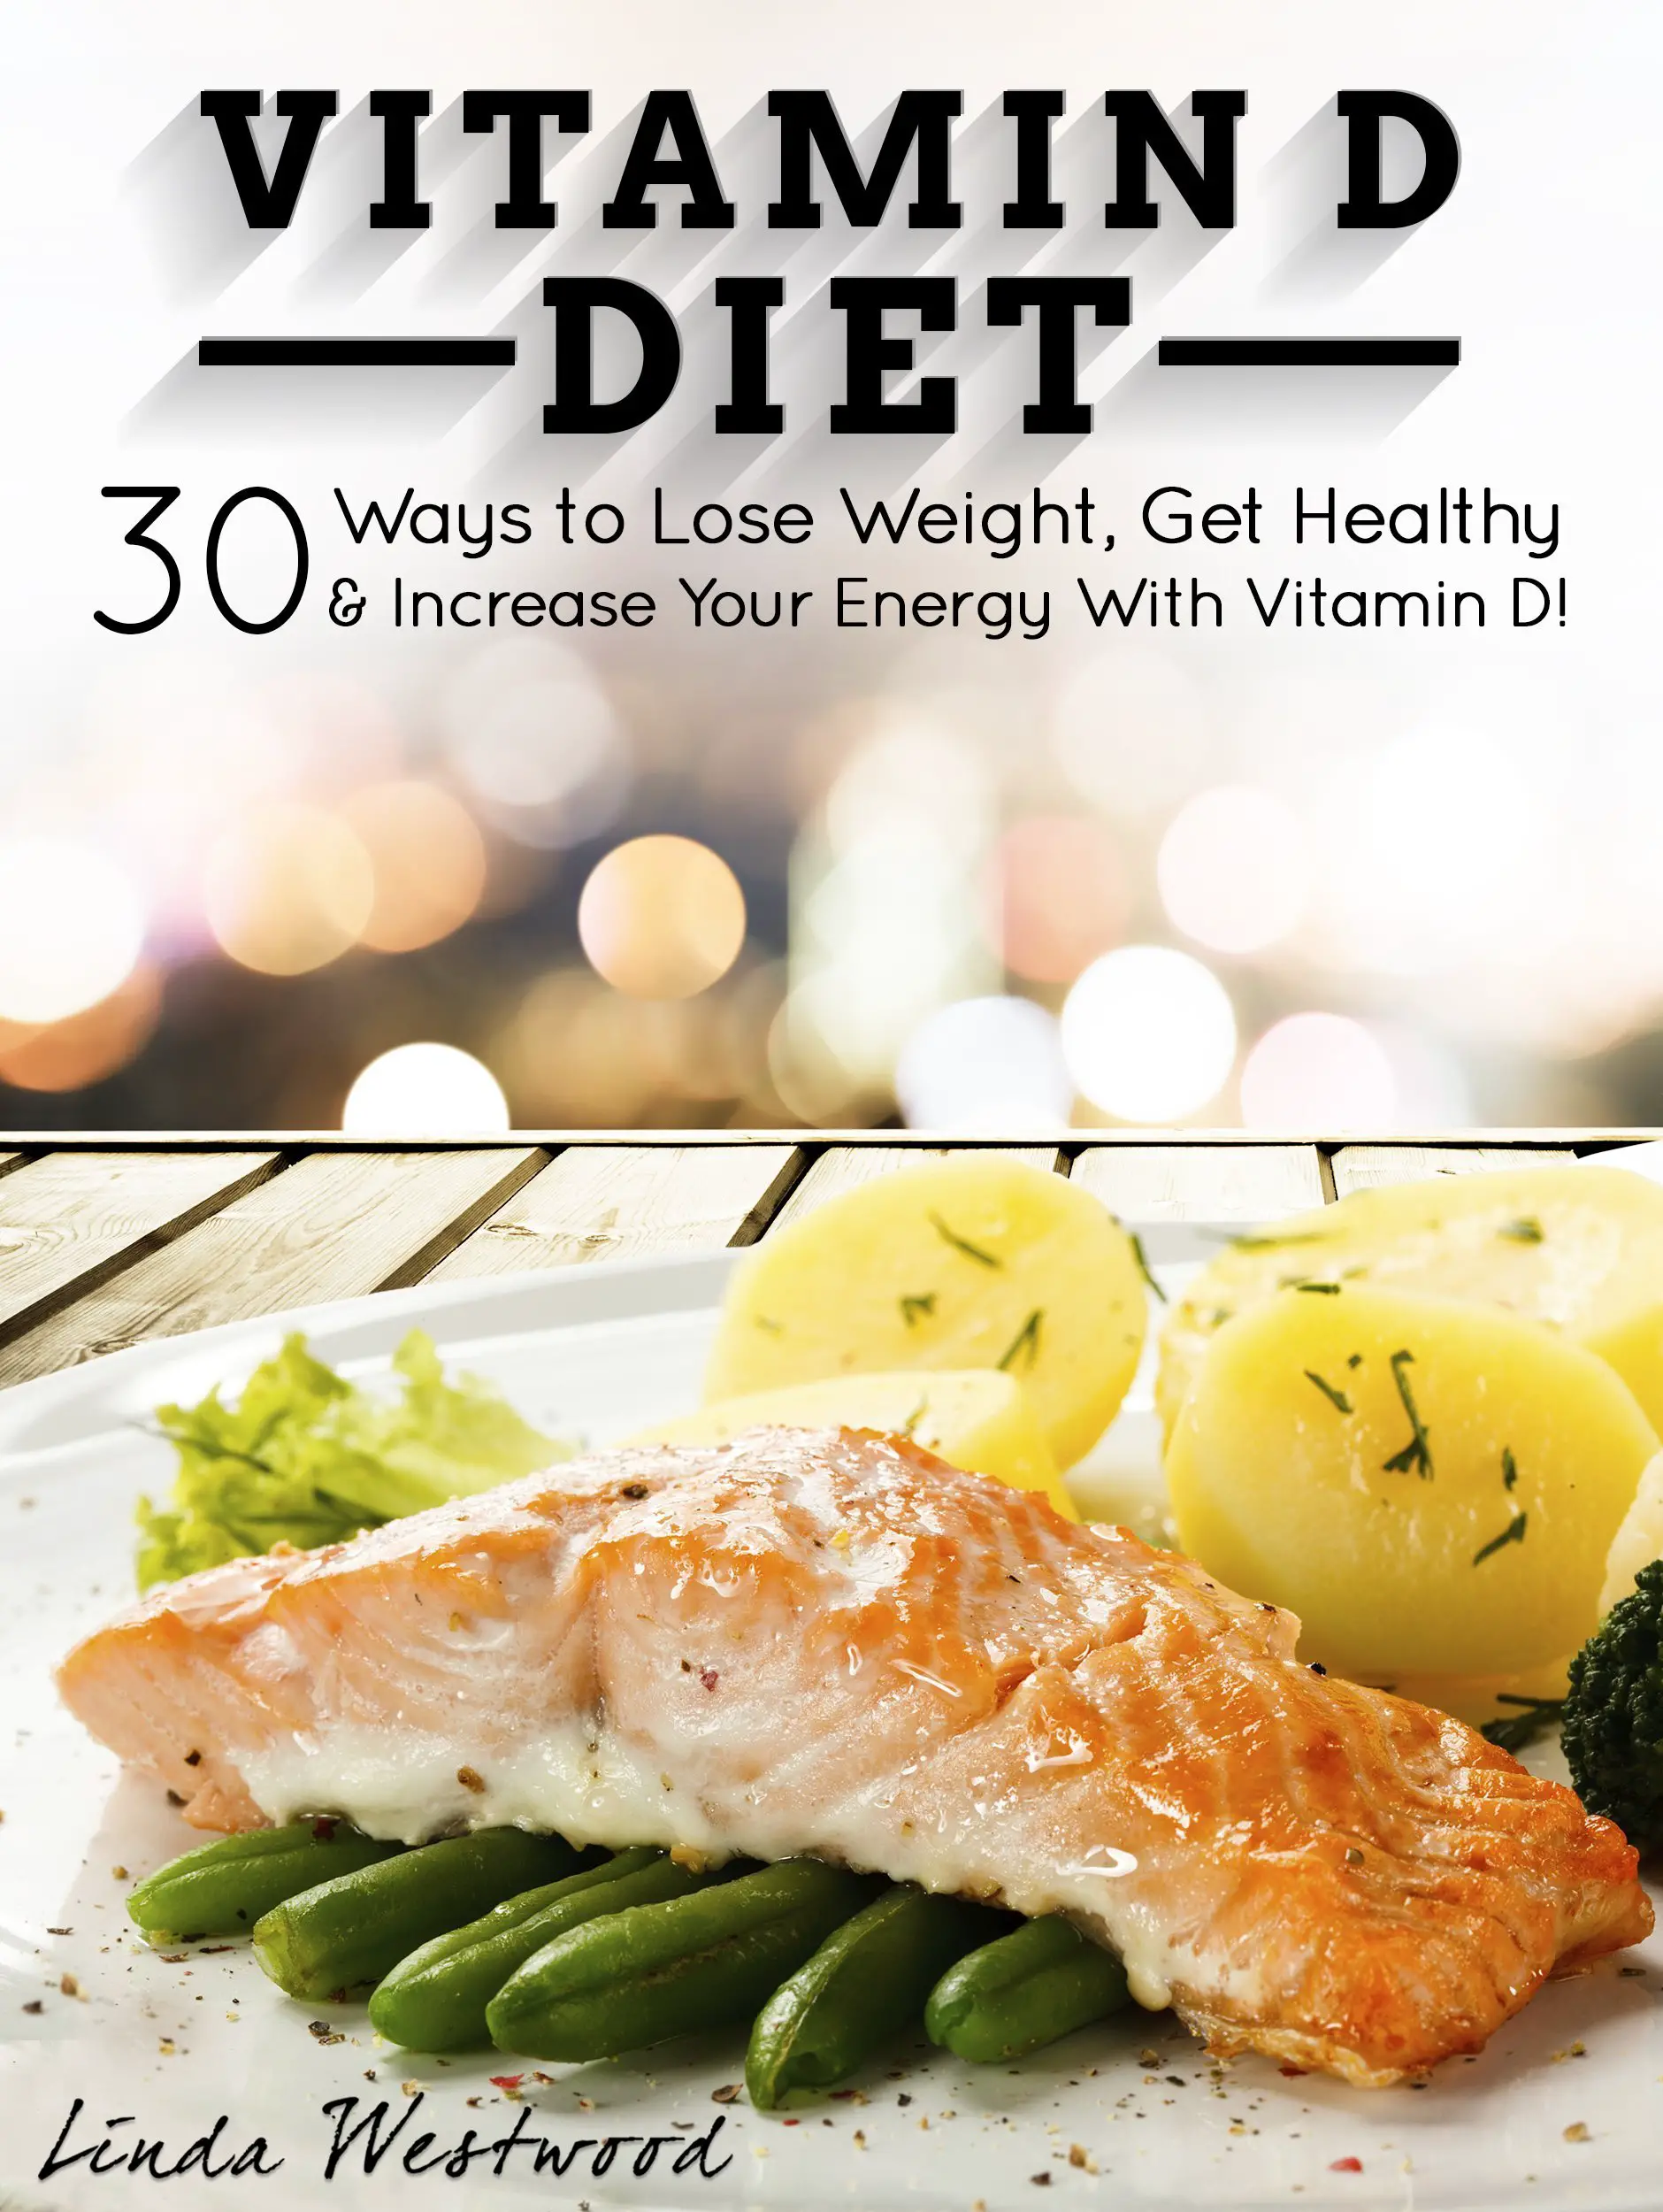 Vitamin d to lose weight